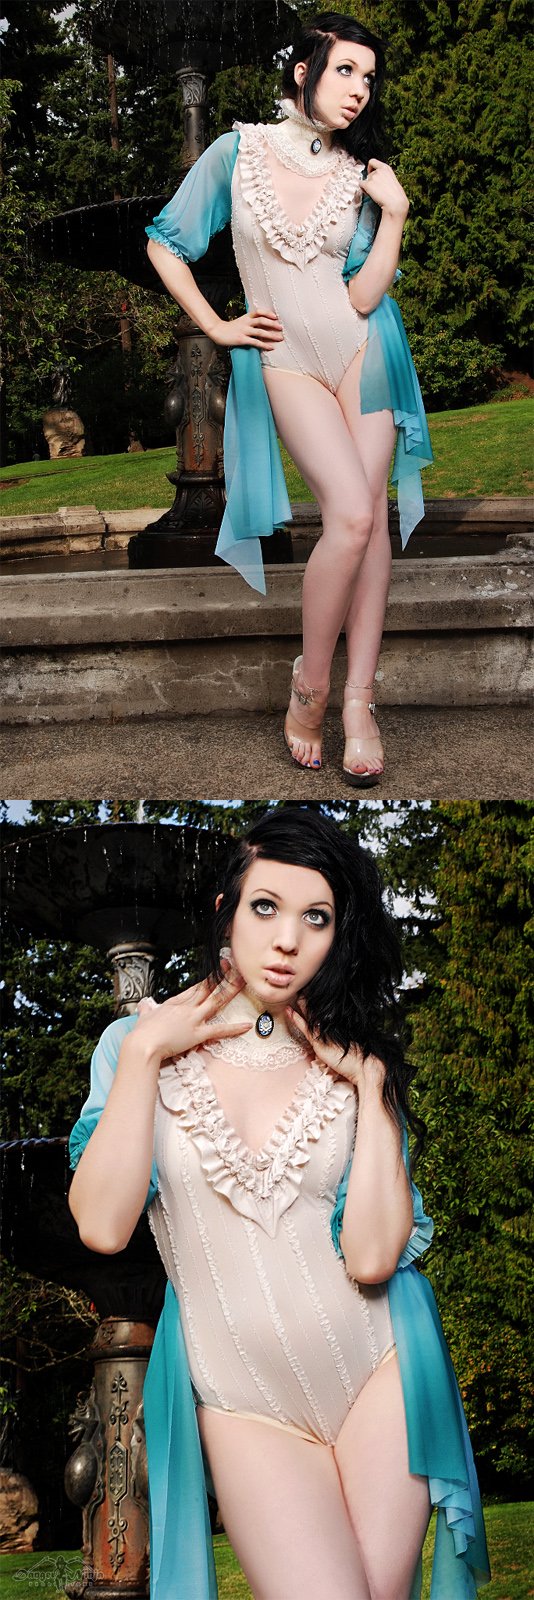 Female model photo shoot of AmyElizabethCouture and Twigglet in Portland, OR